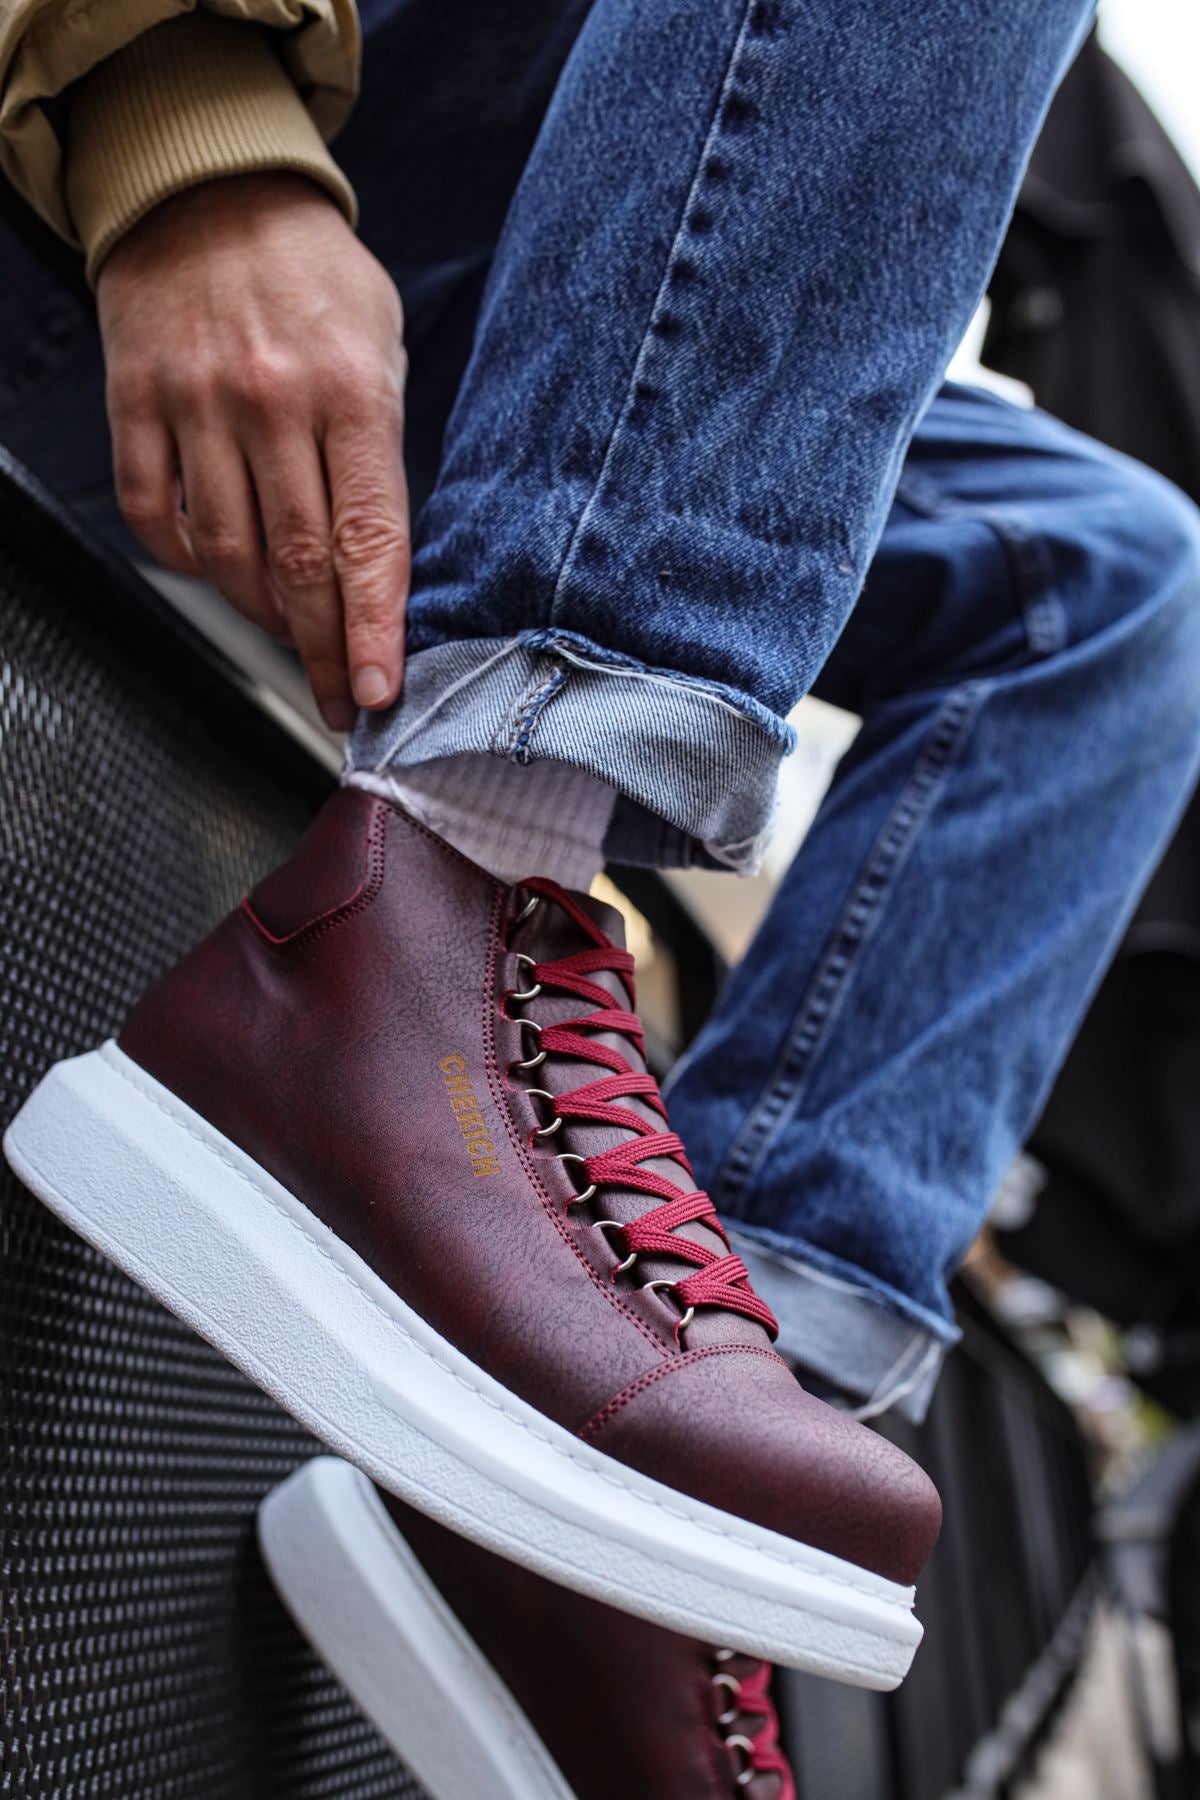 CH258 Men's Burgundy-White Sole Metal Slug Lace-up High Sole Casual Sneaker Sports Boots - STREETMODE ™